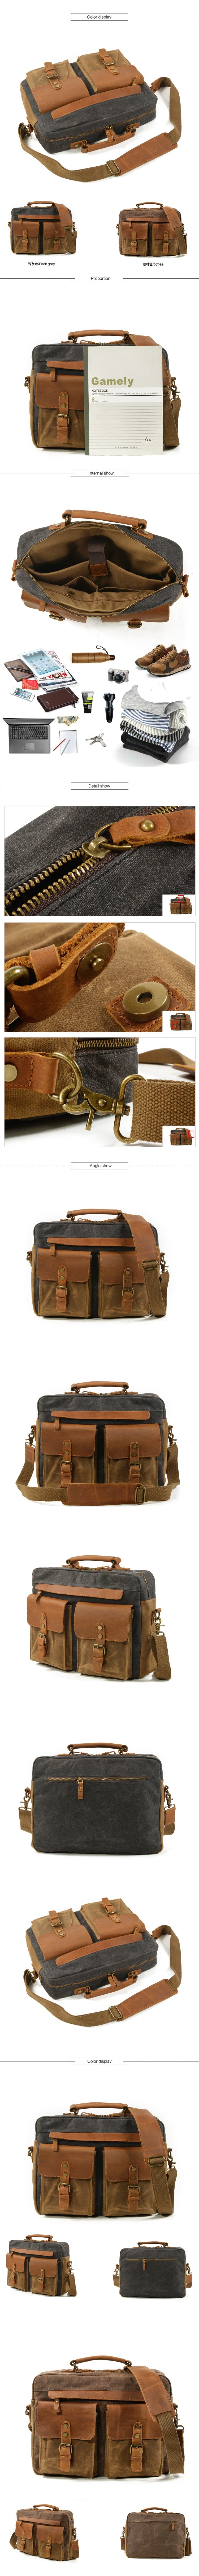 DETAIL AND PRODUCT DISPLAY of Woosir Messenger Bags for Men